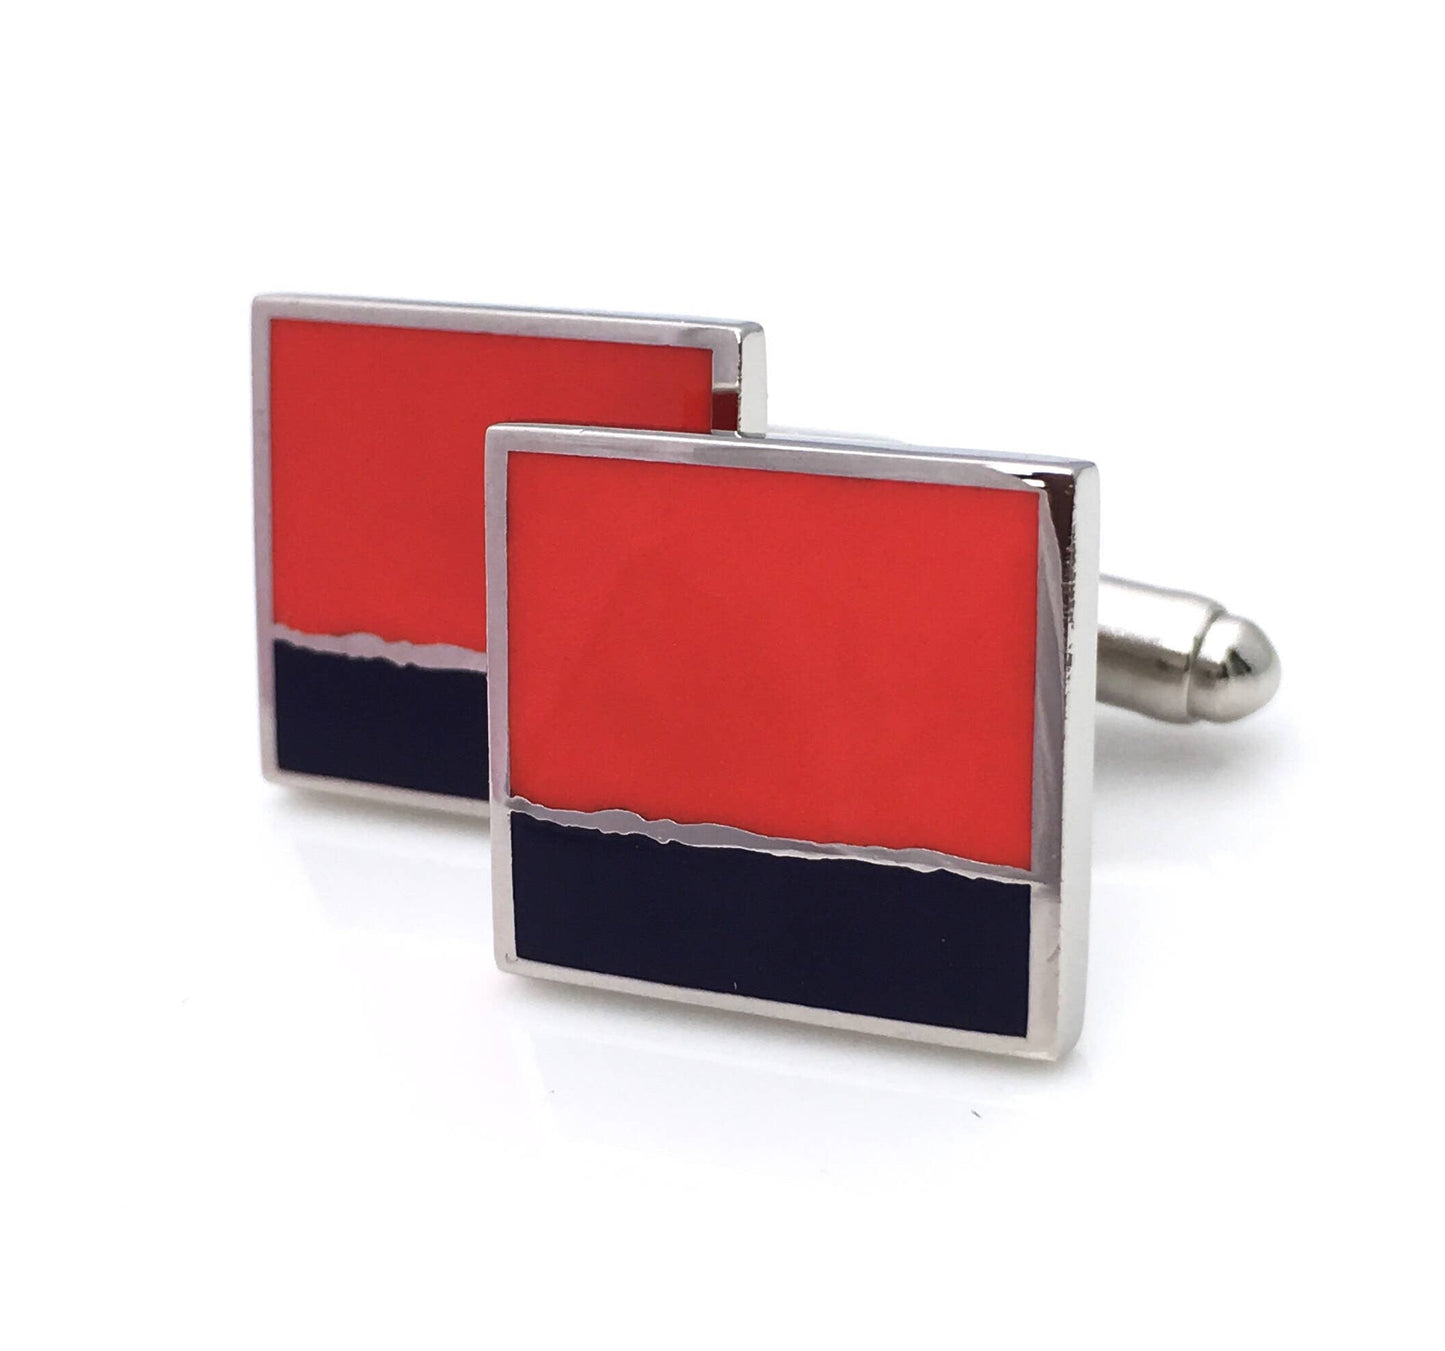 Enamel cufflinks with square in orange enamel and smaller rectangle in navy blue